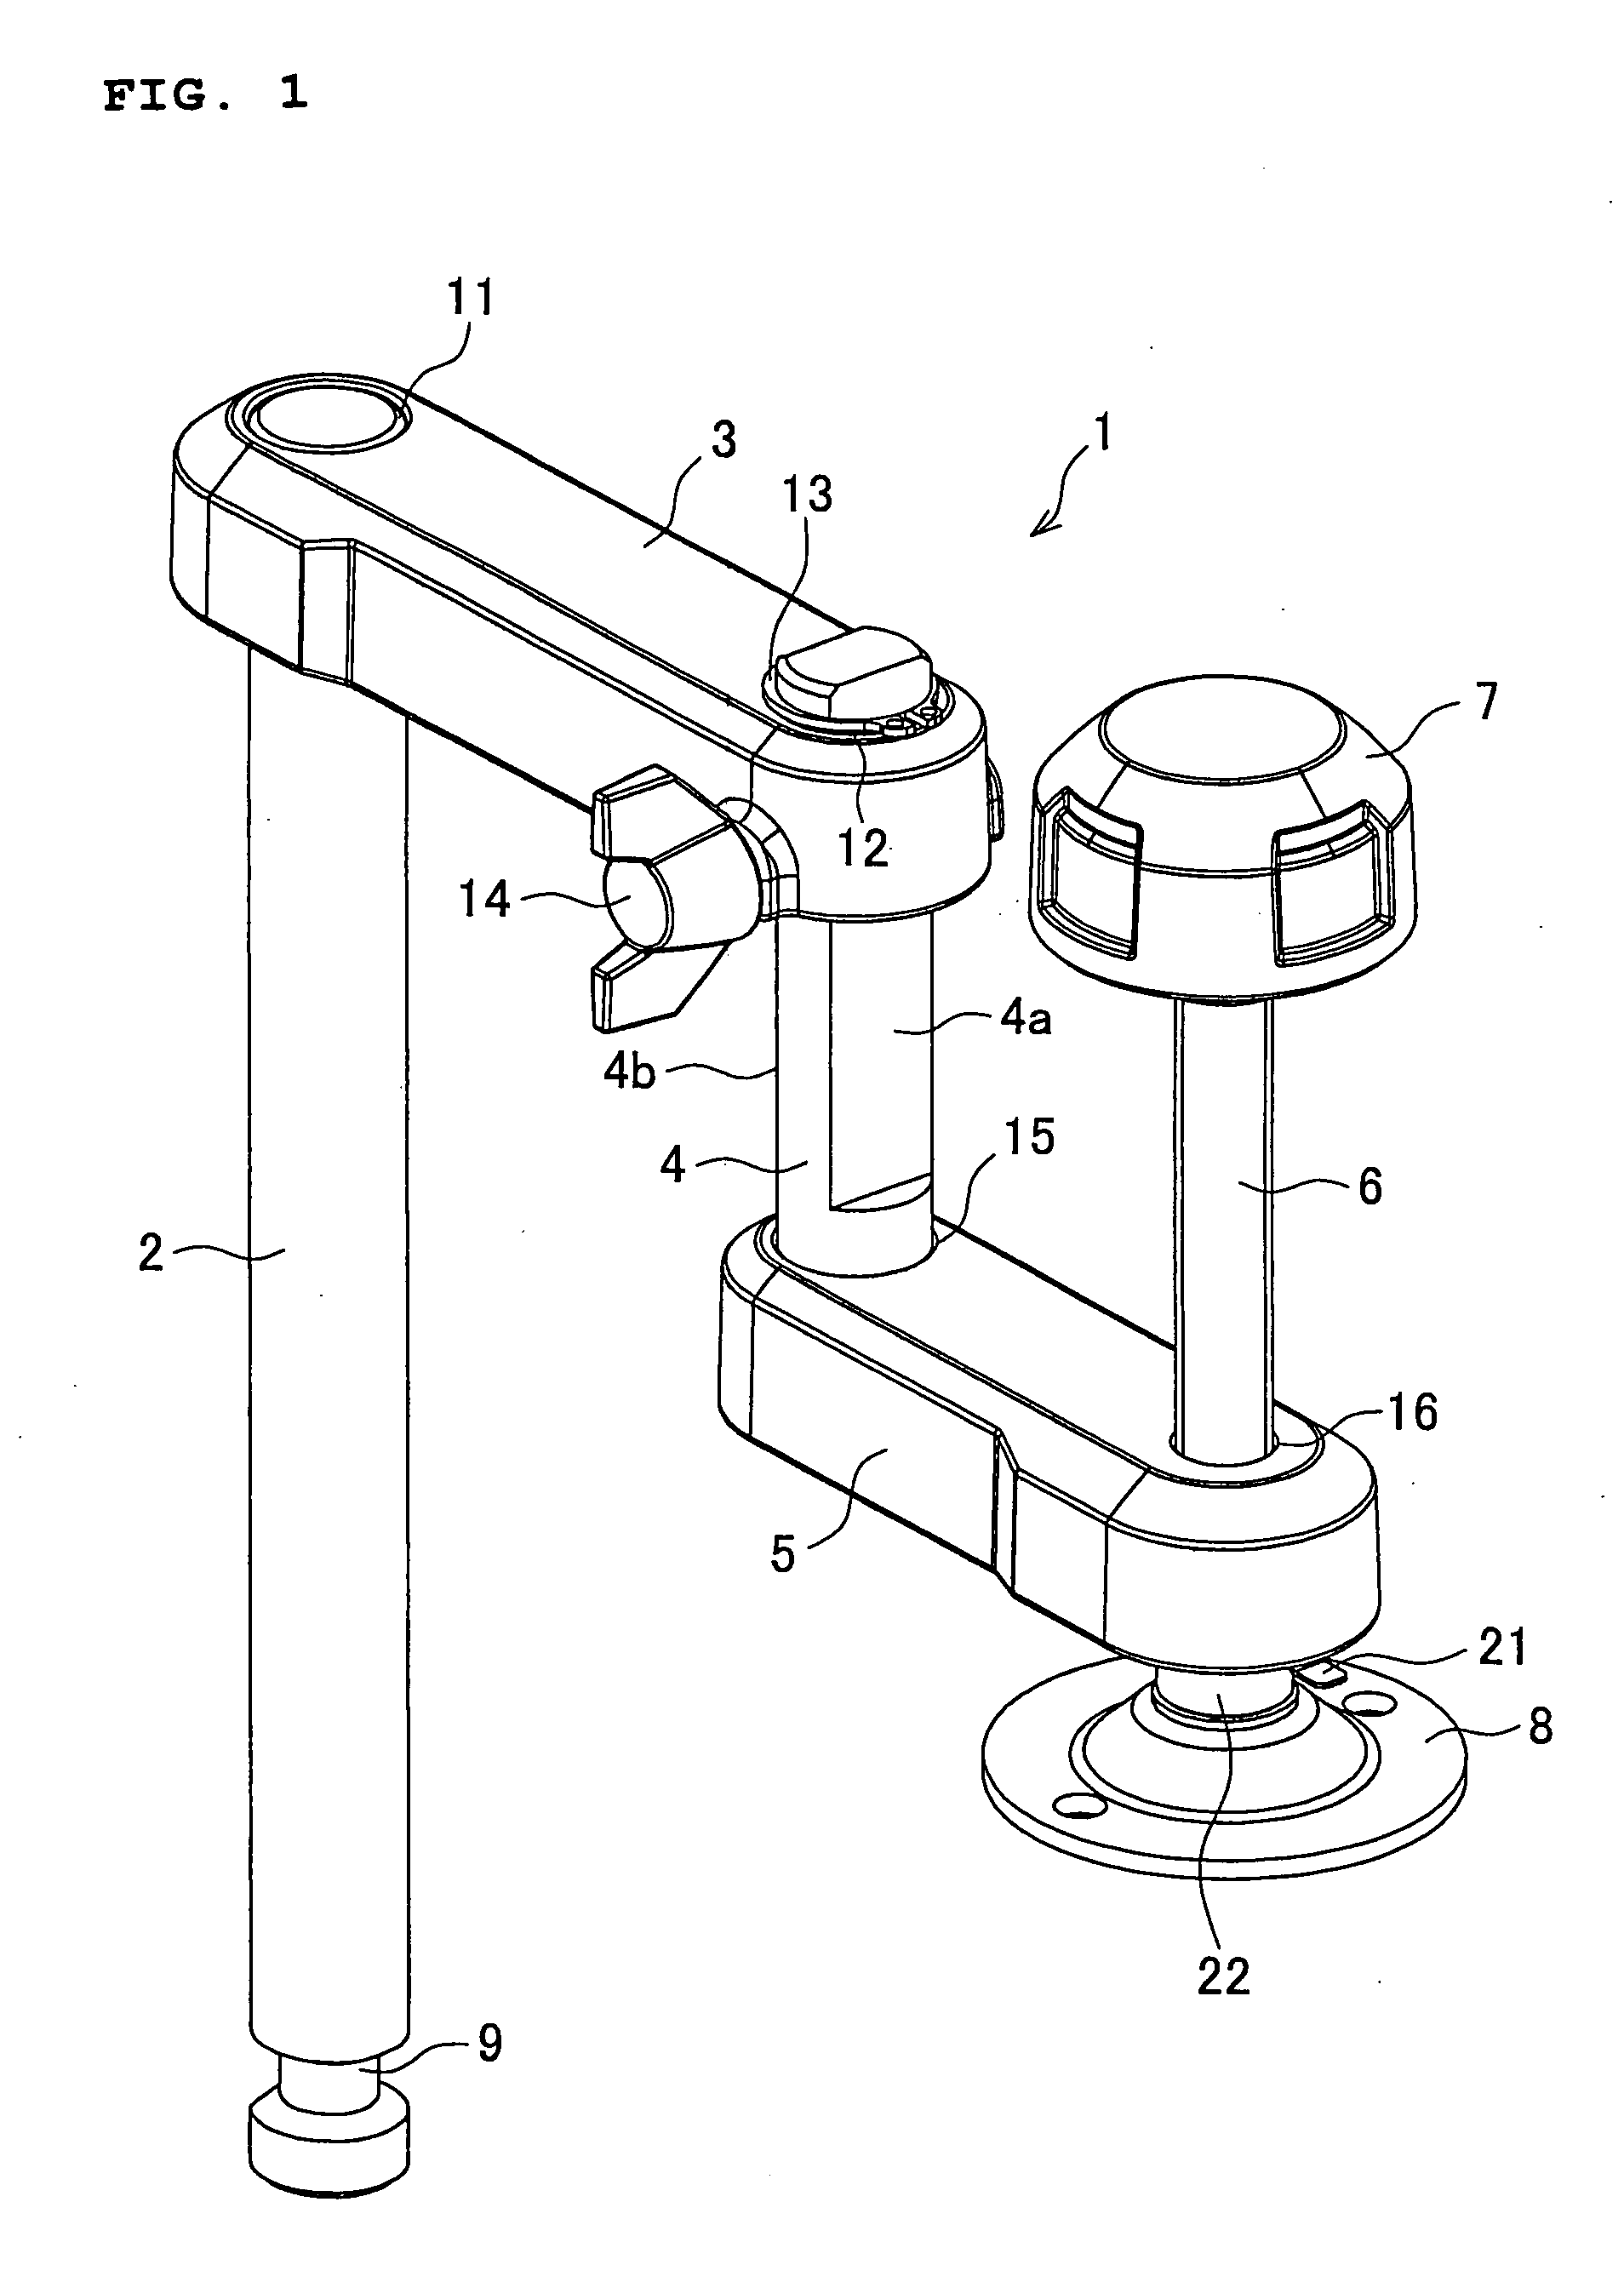 Vise assembly and bench circular sawing machine